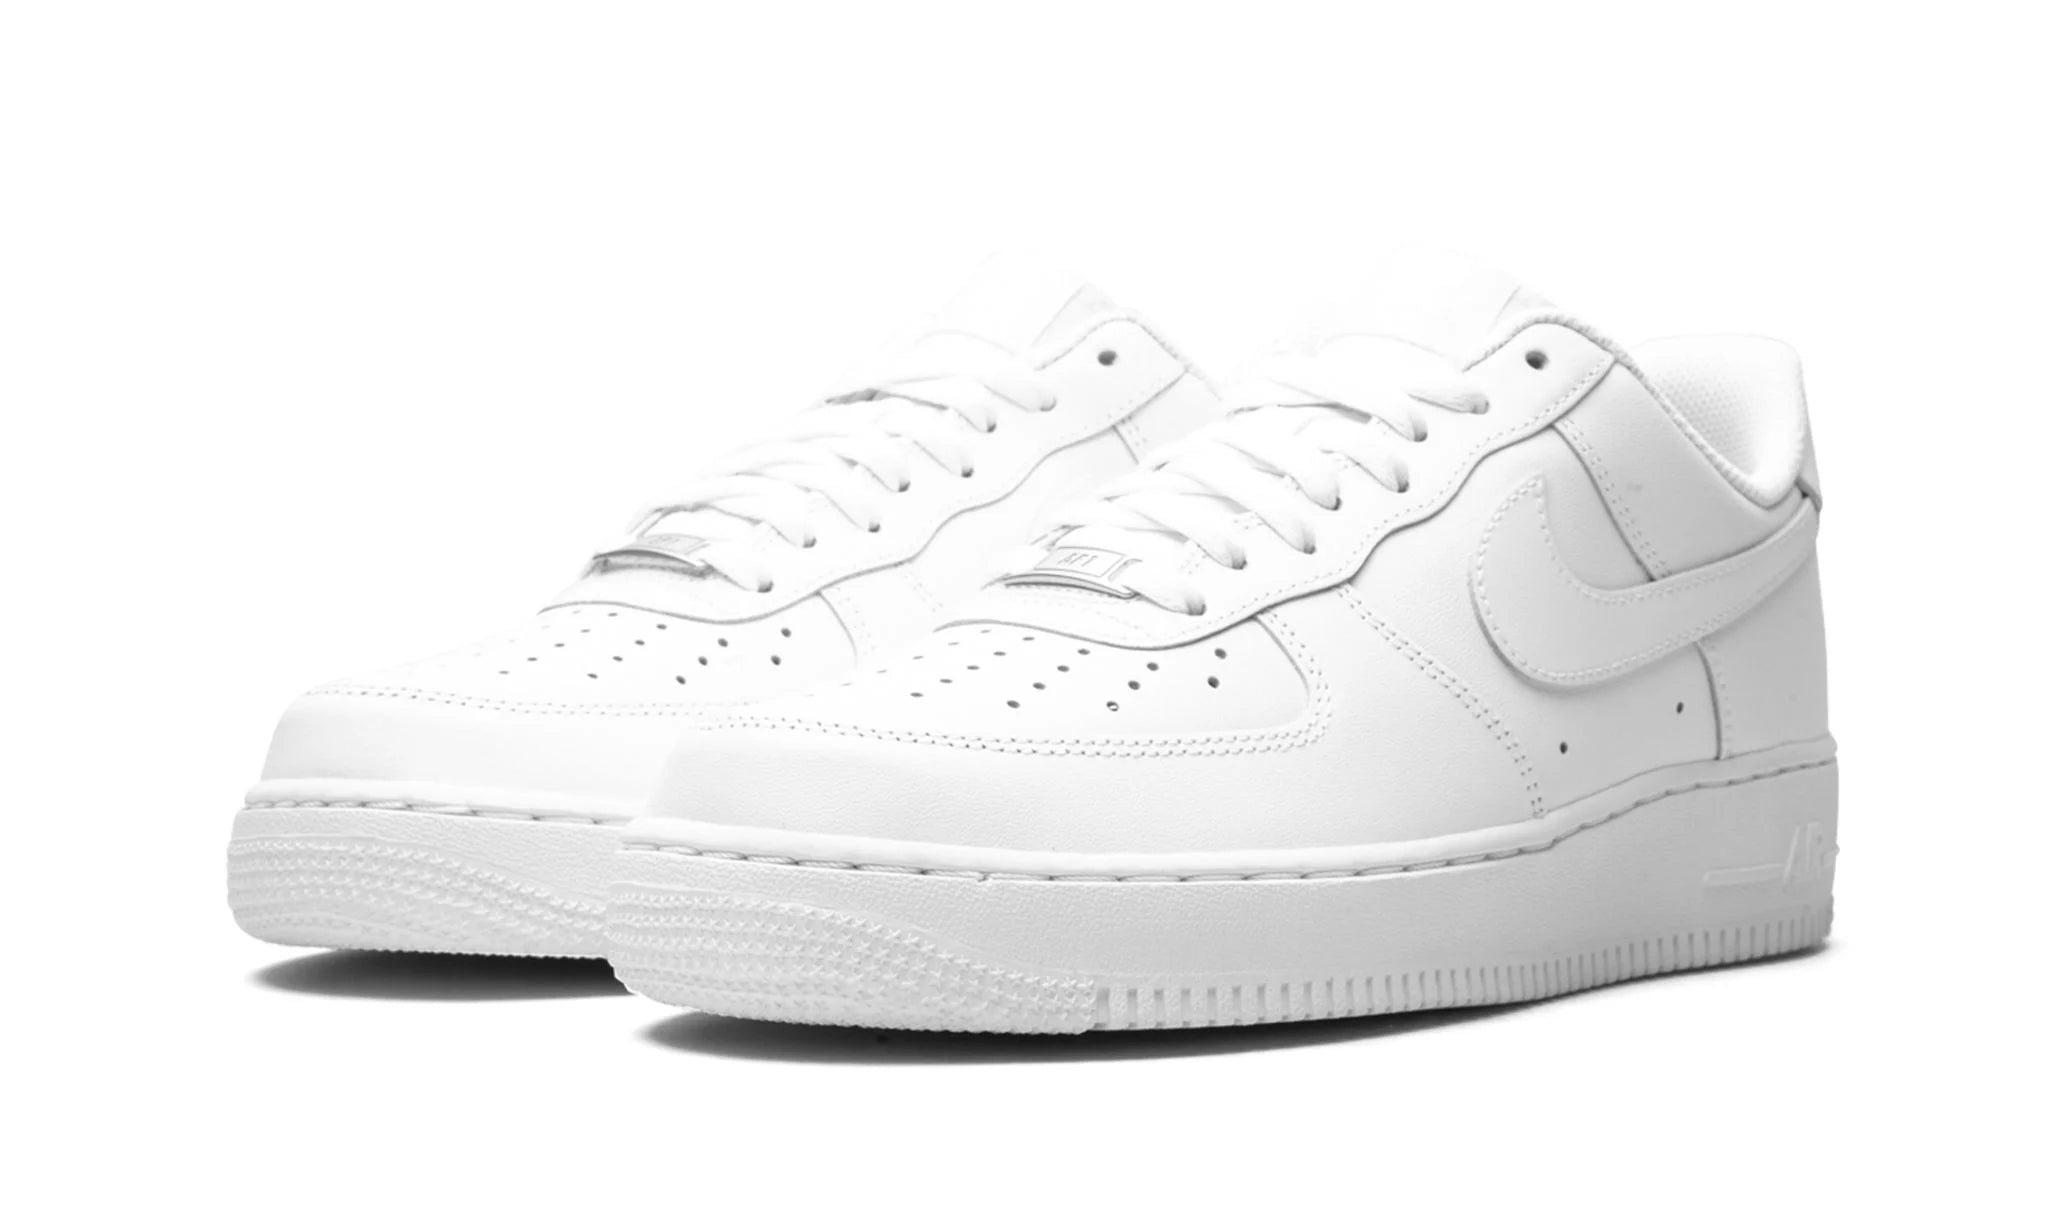 AIR FORCE 1 LOW '07 "White on White"